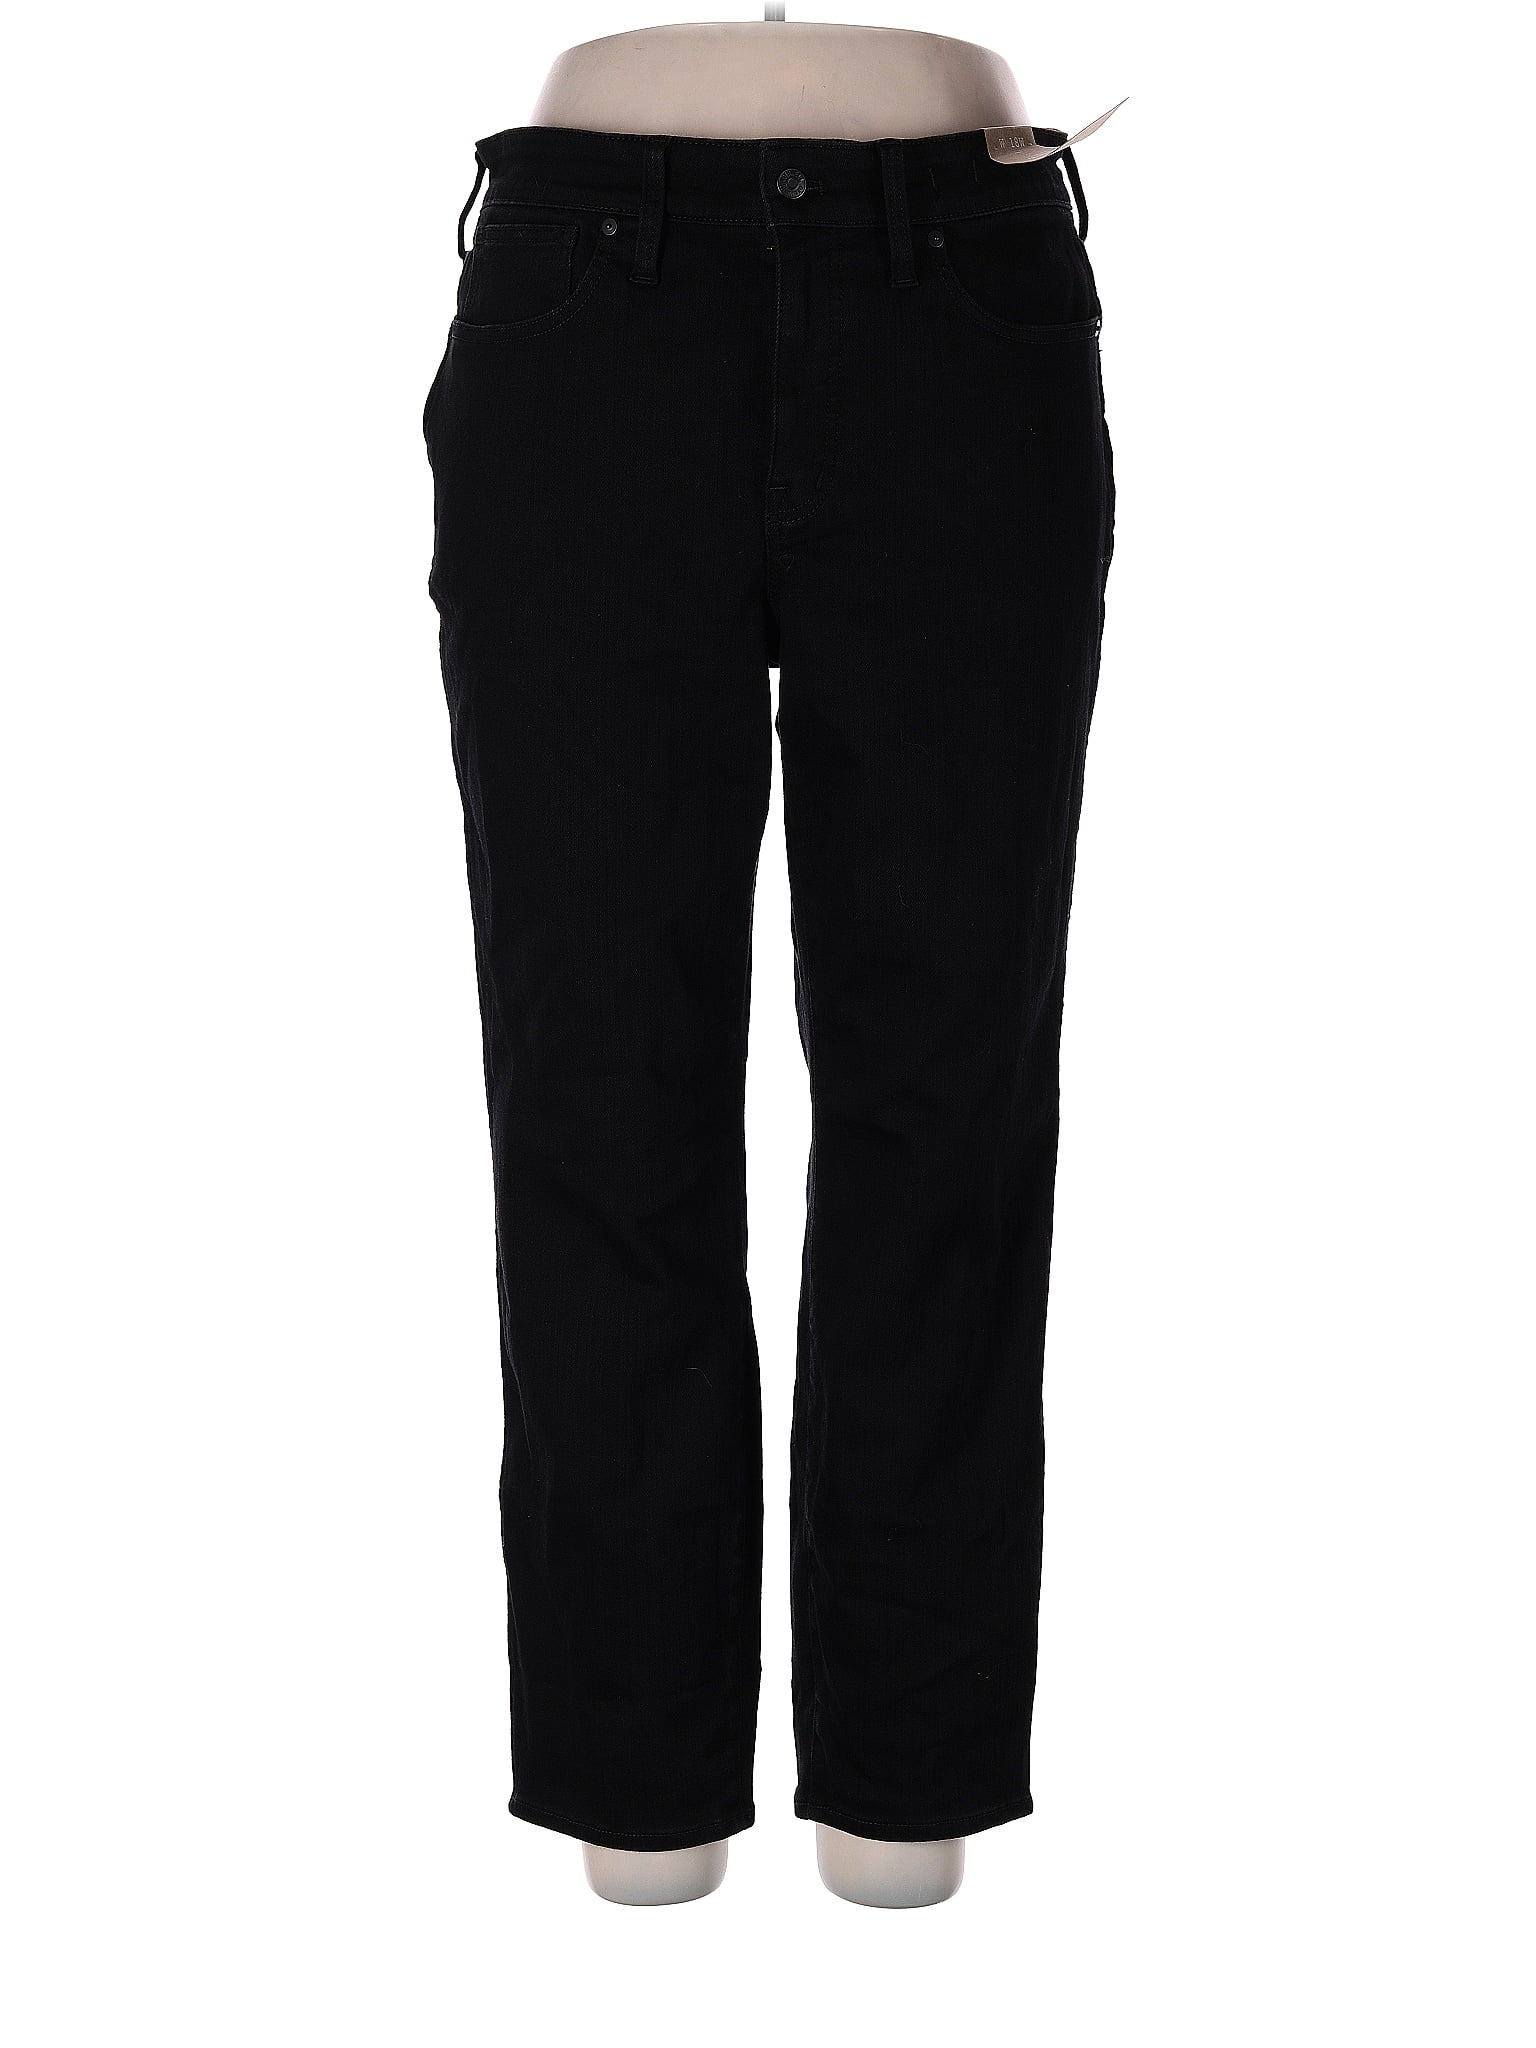 Madewell Black Plus Curvy Stovepipe Jeans in Black Rinse Wash Size 18 ...